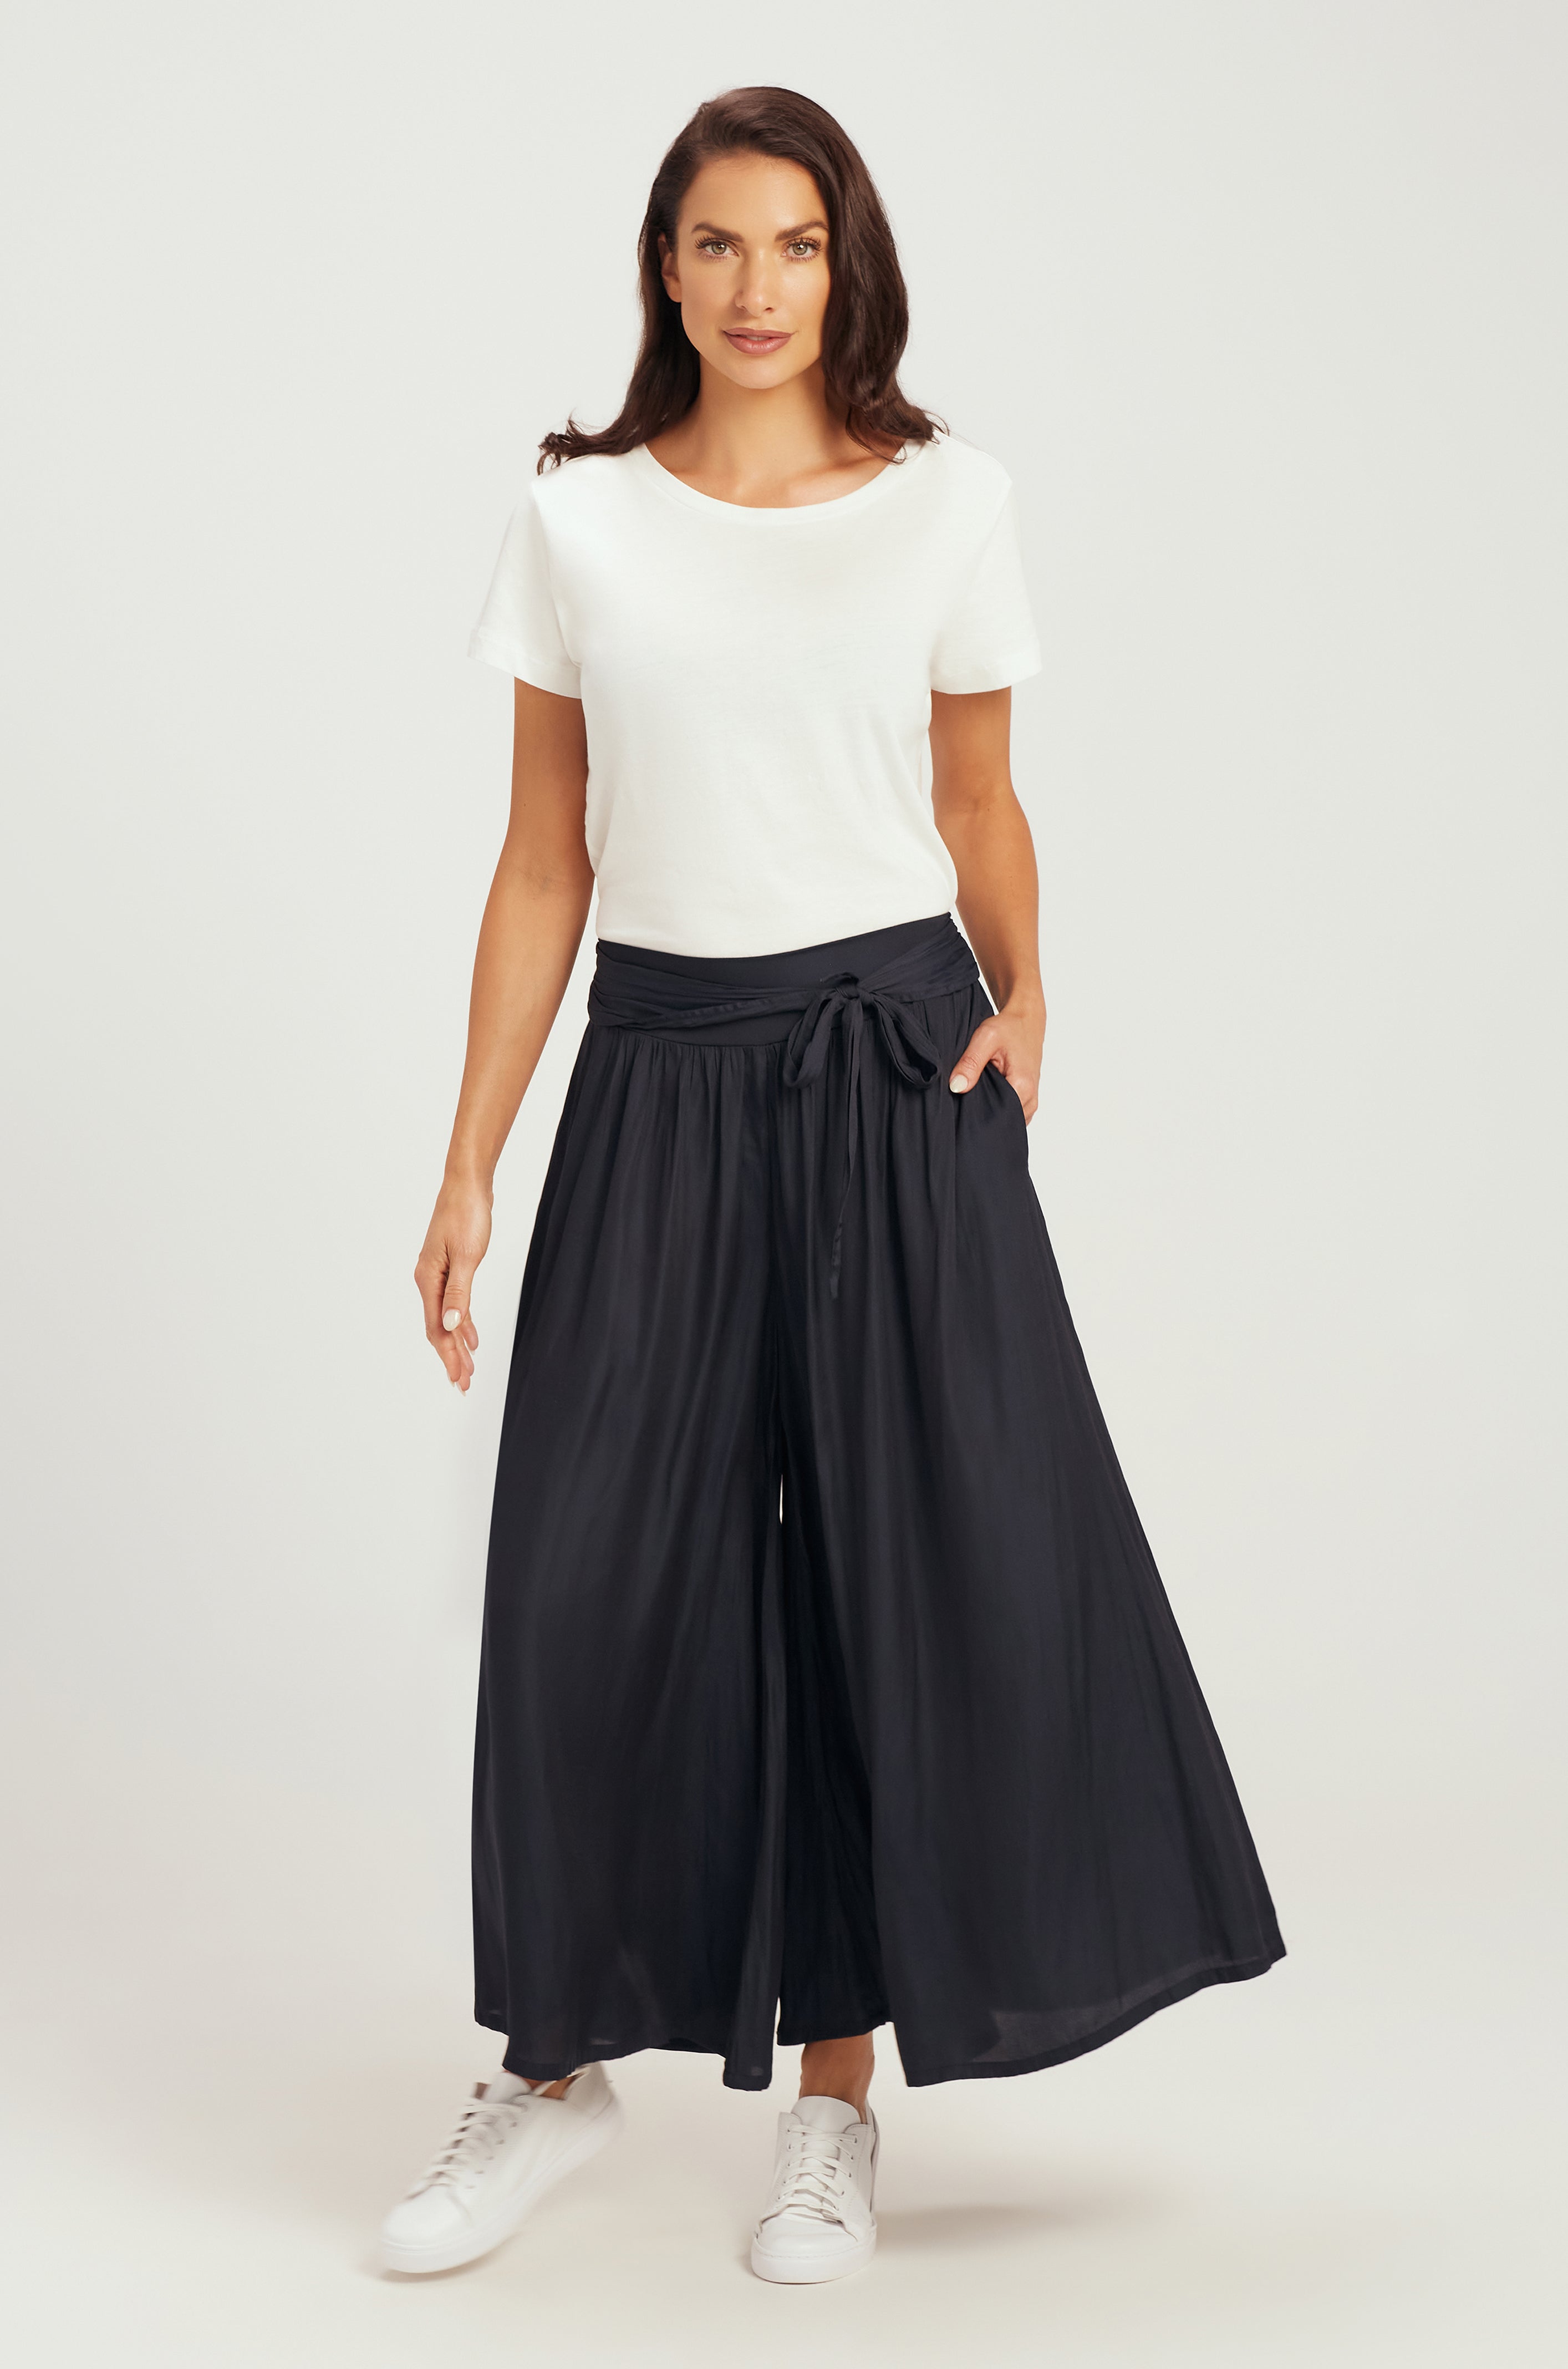 SKIRT PANTS / NAVY / SIZES LARGE , 4XL,5XL PRE ORDERS ONLY available MID MAY 24